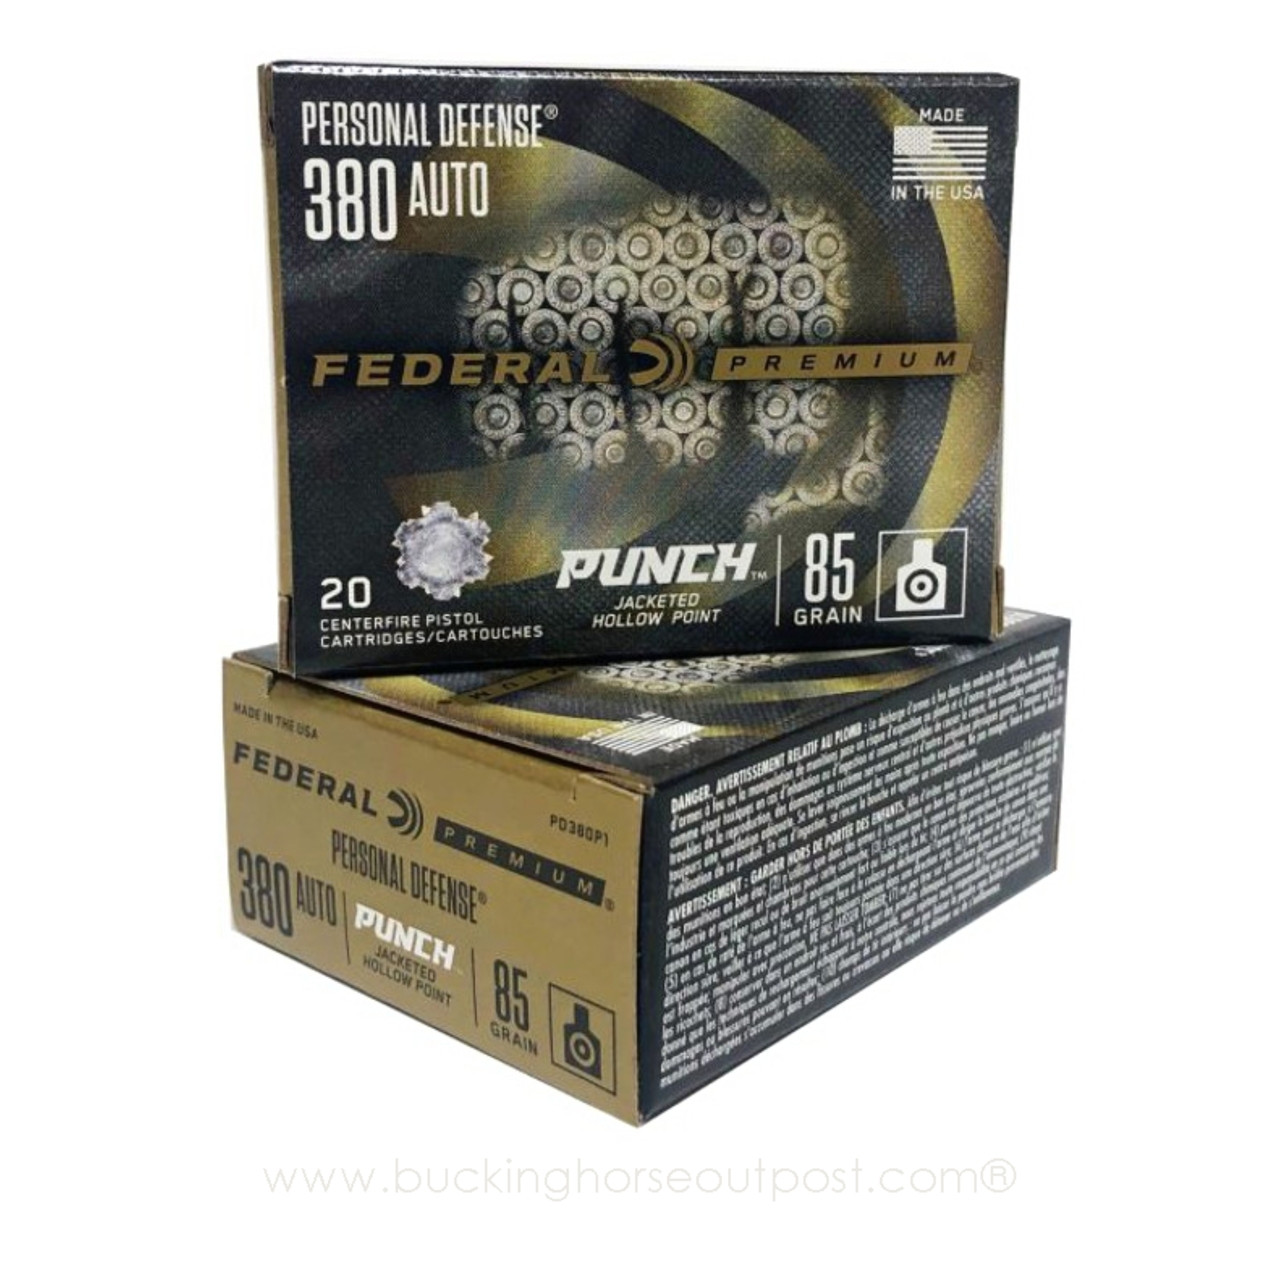 Federal Personal Defense .380 Auto 85 Grain Punch Jacketed Hollow Point 20rds Per Box (PD380P1)- FREE SHIPPING ON ORDERS OVER $175